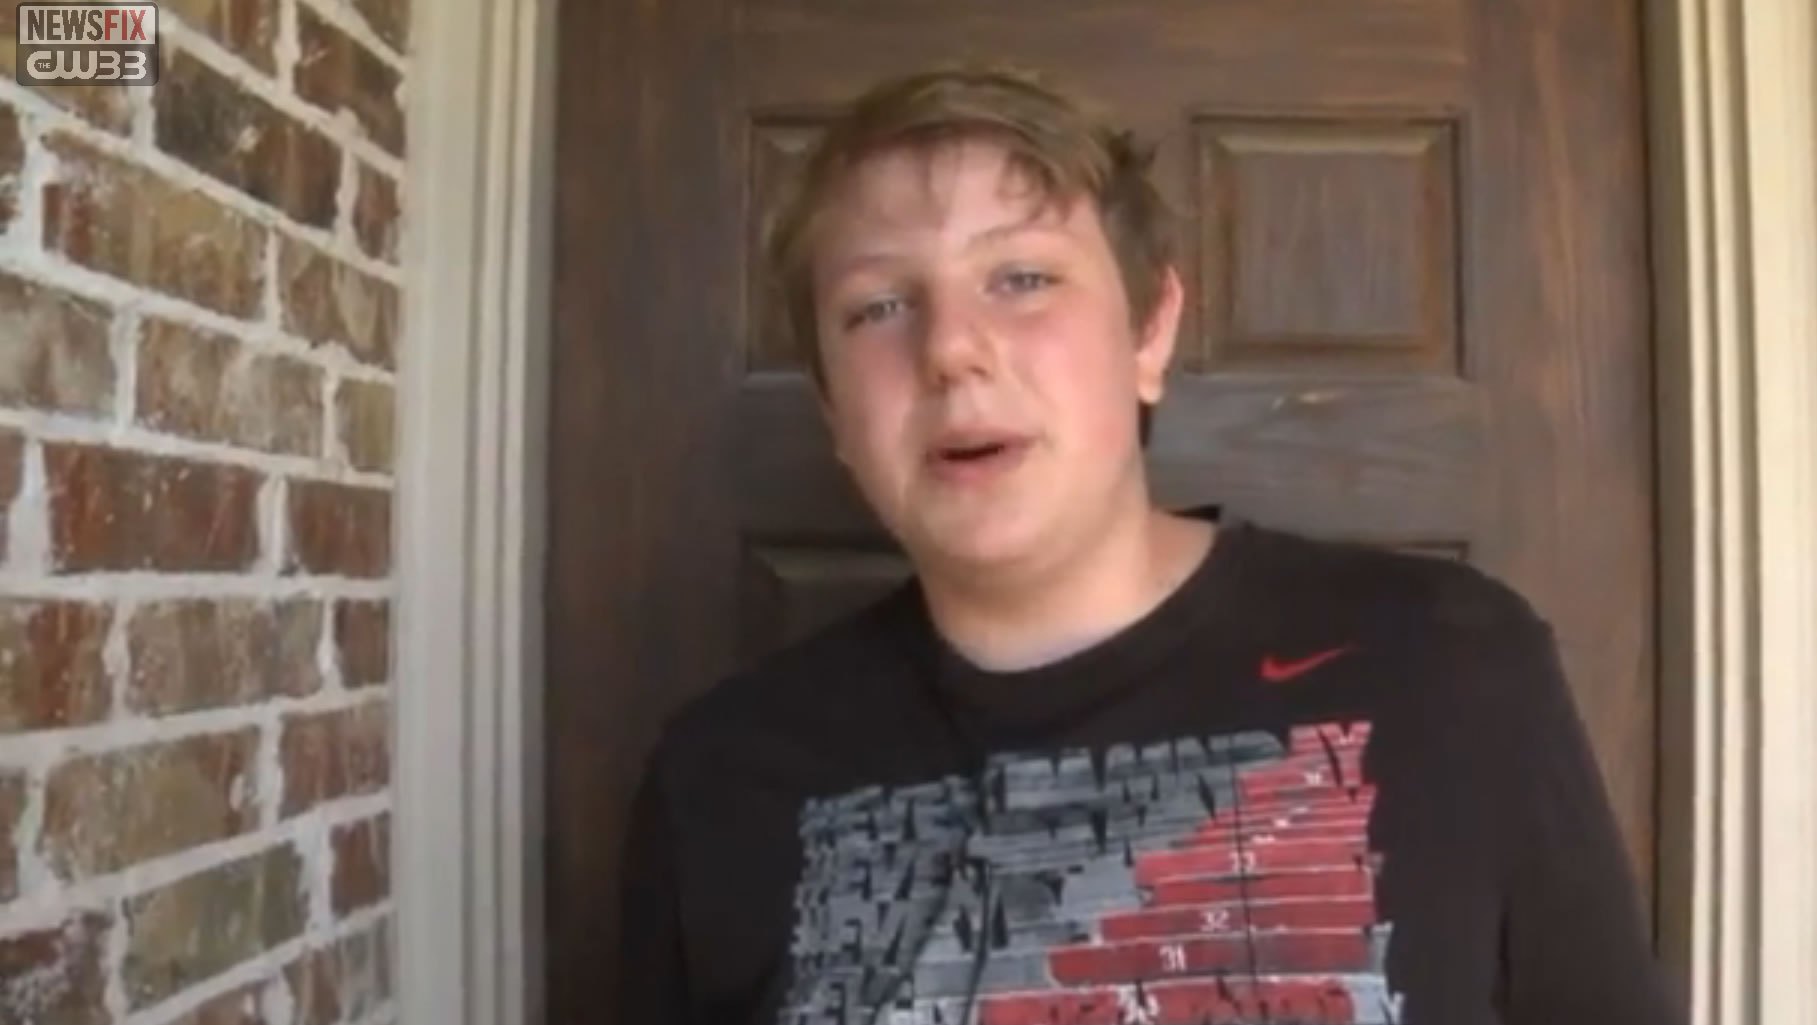 McKinney Pool Incident : Meet The Teen Who Recorded The Incident